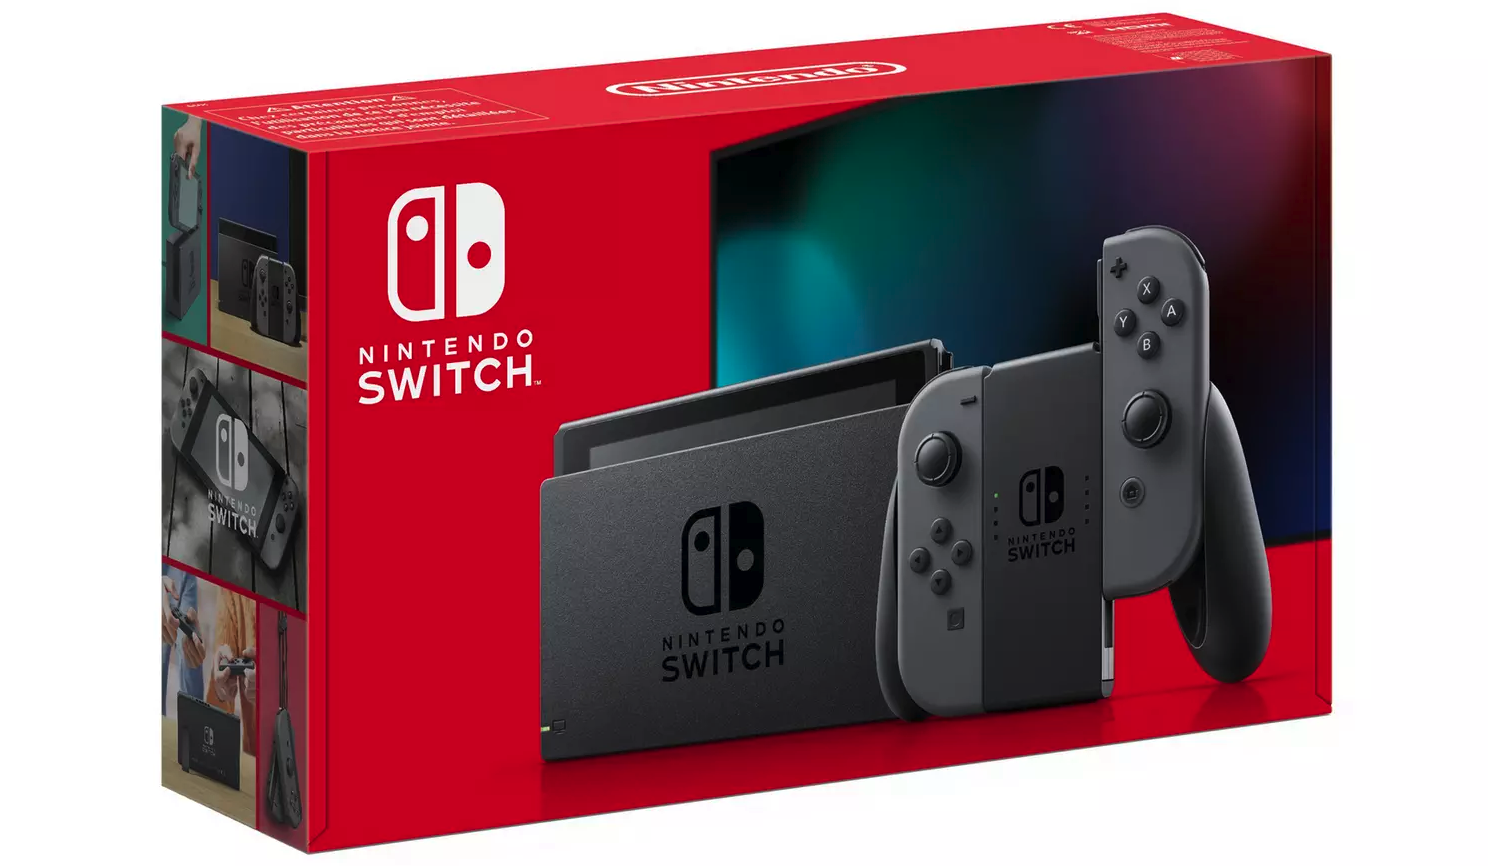 Nintendo Switch Console – Grey with improved battery